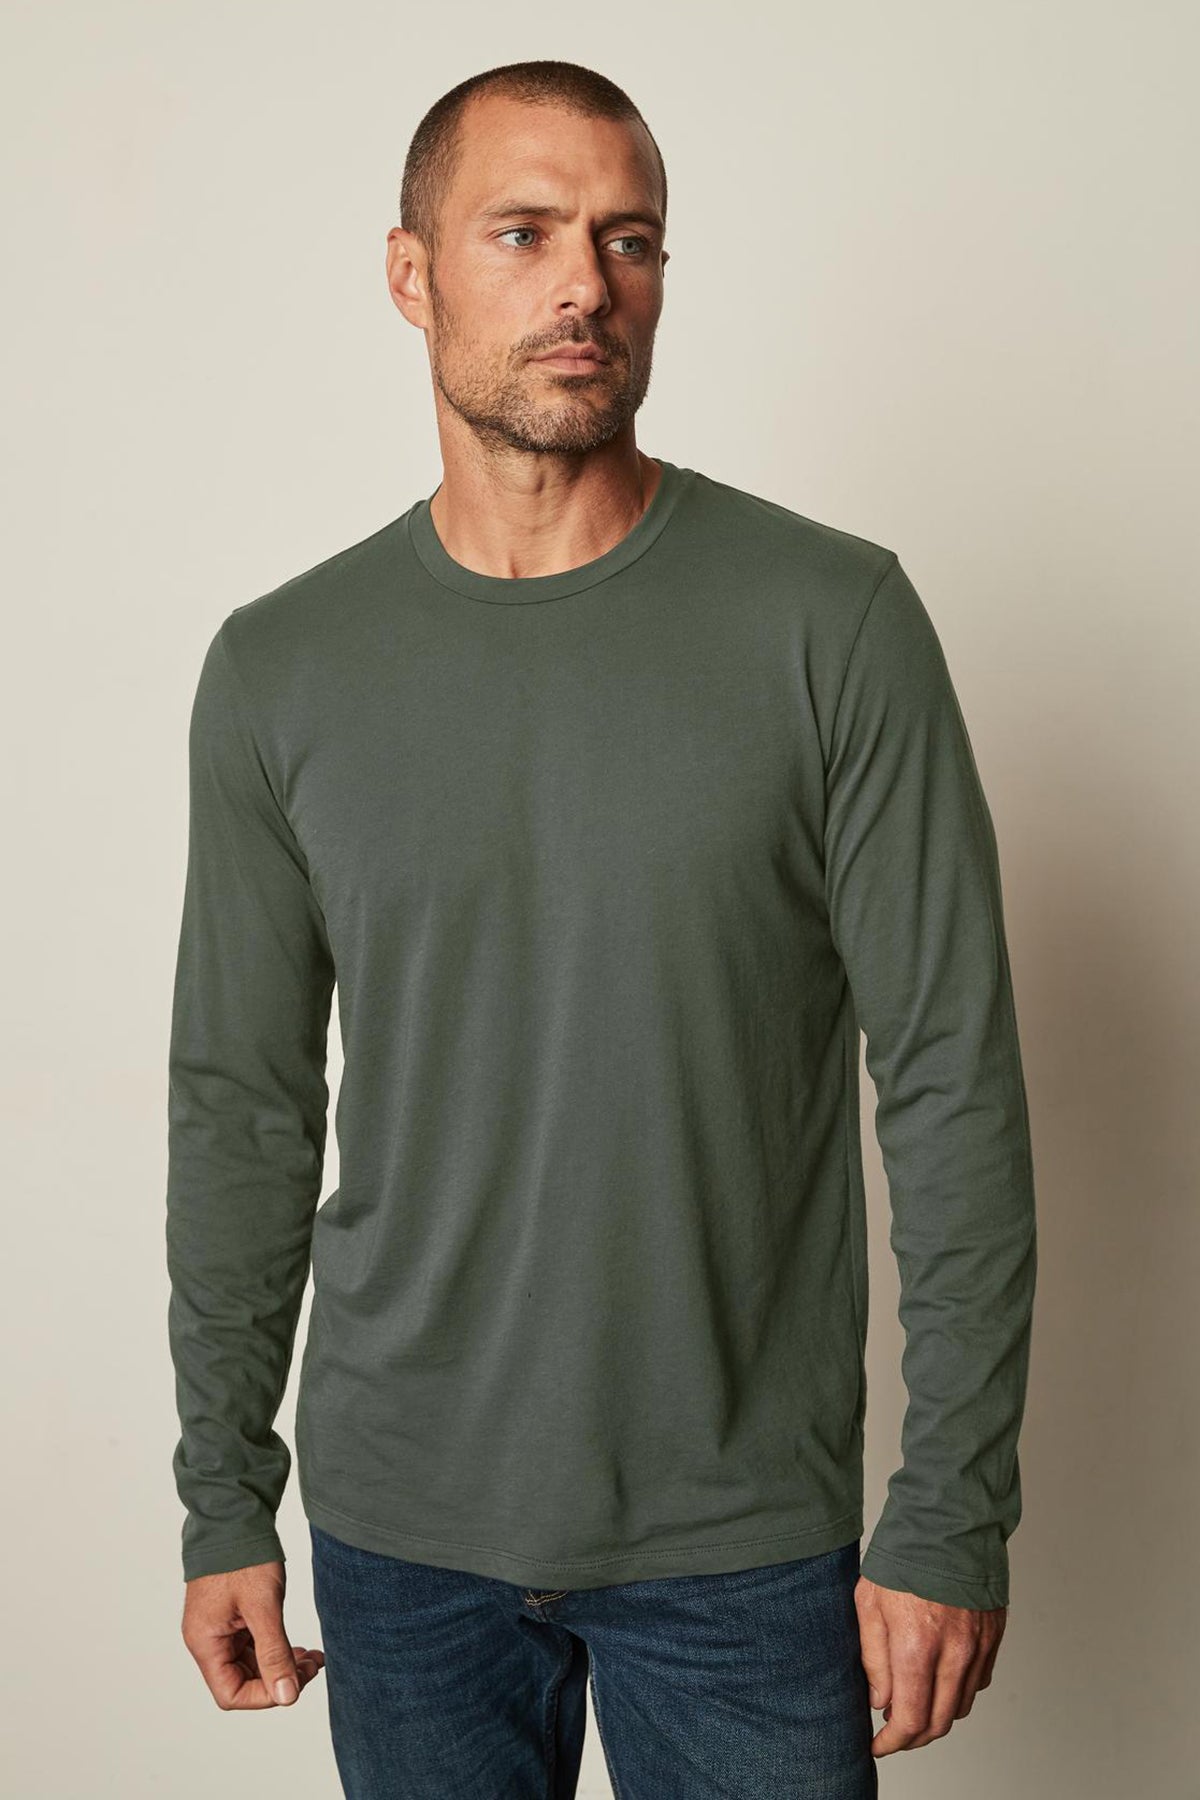   Skeeter Crew Neck Long Sleeve Tee in olive with blue denim front 